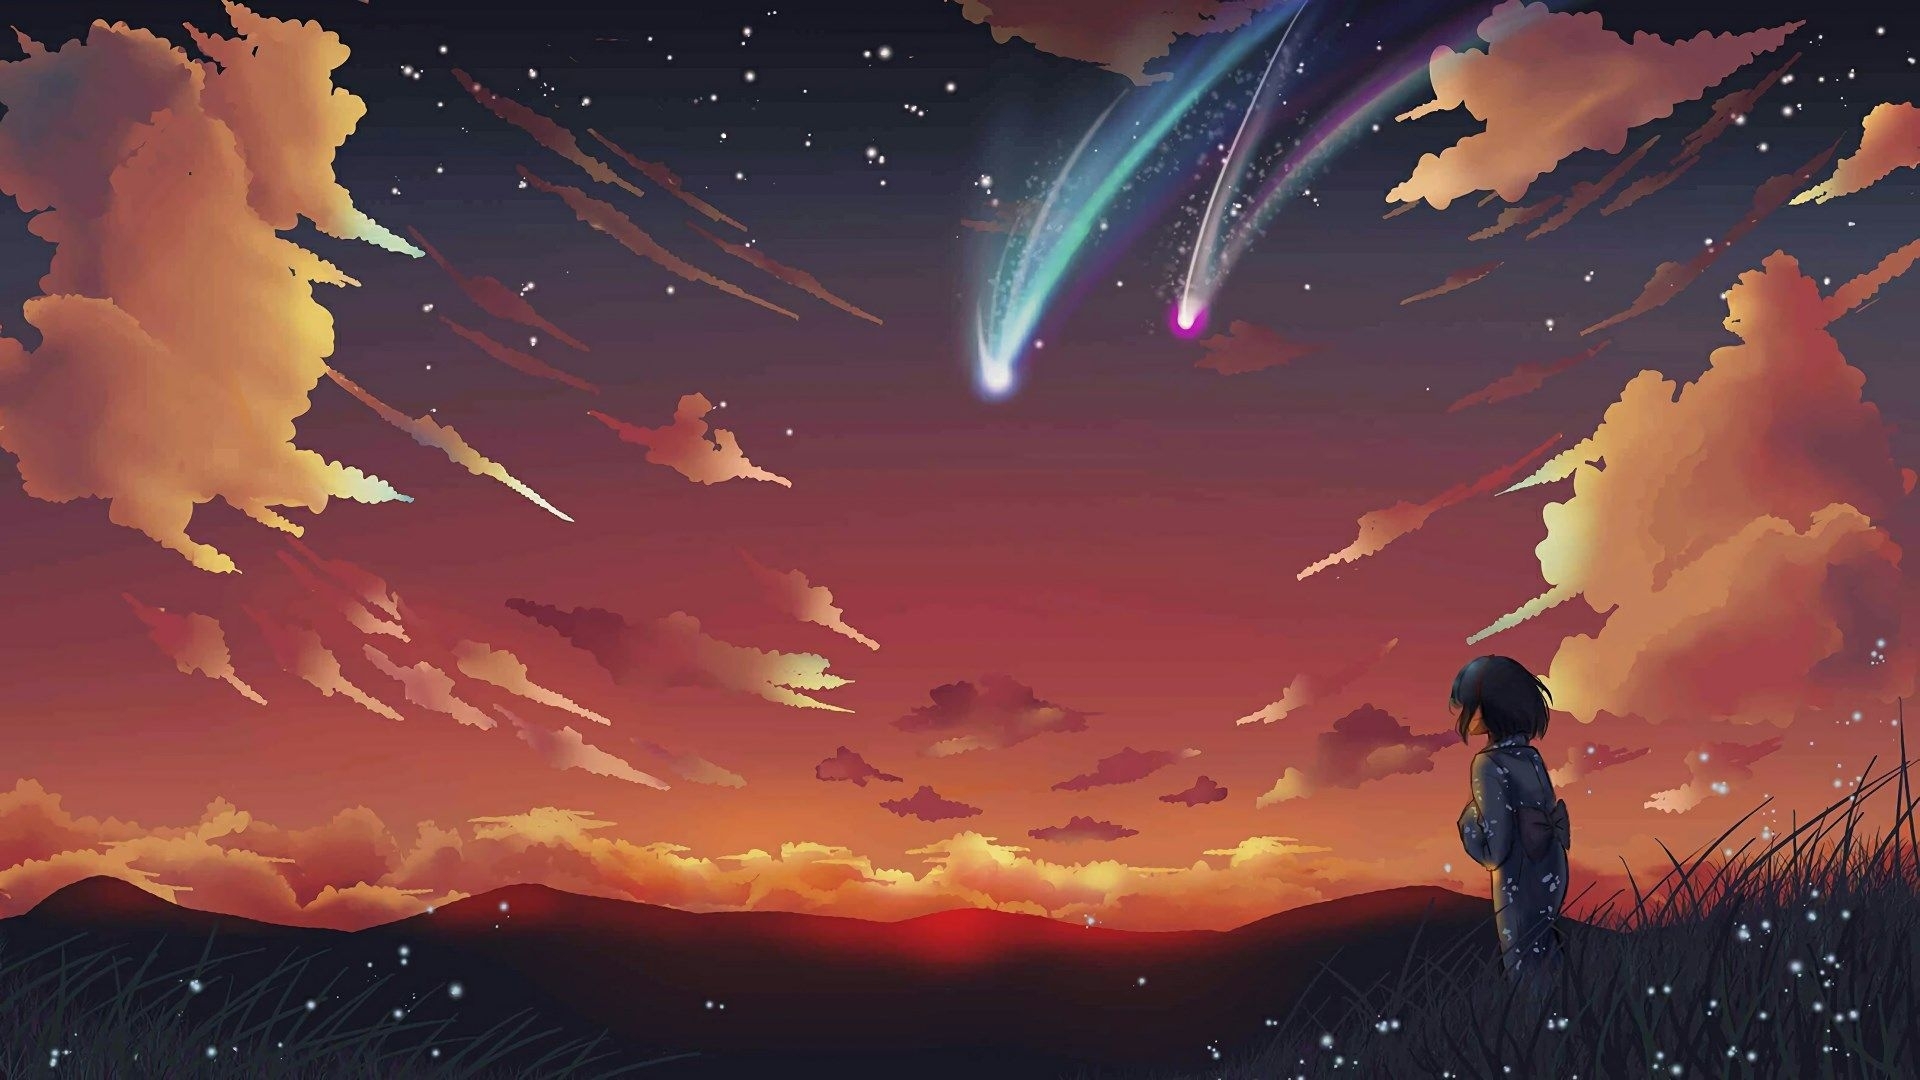 Your Name Wallpaper - Your Name wallpapers HD for desktop backgrounds / Landscape, anime, space, sky, stars, your name, horizon, image, screenshot, computer wallpaper, atmosphere of earth, special effects, outer space.